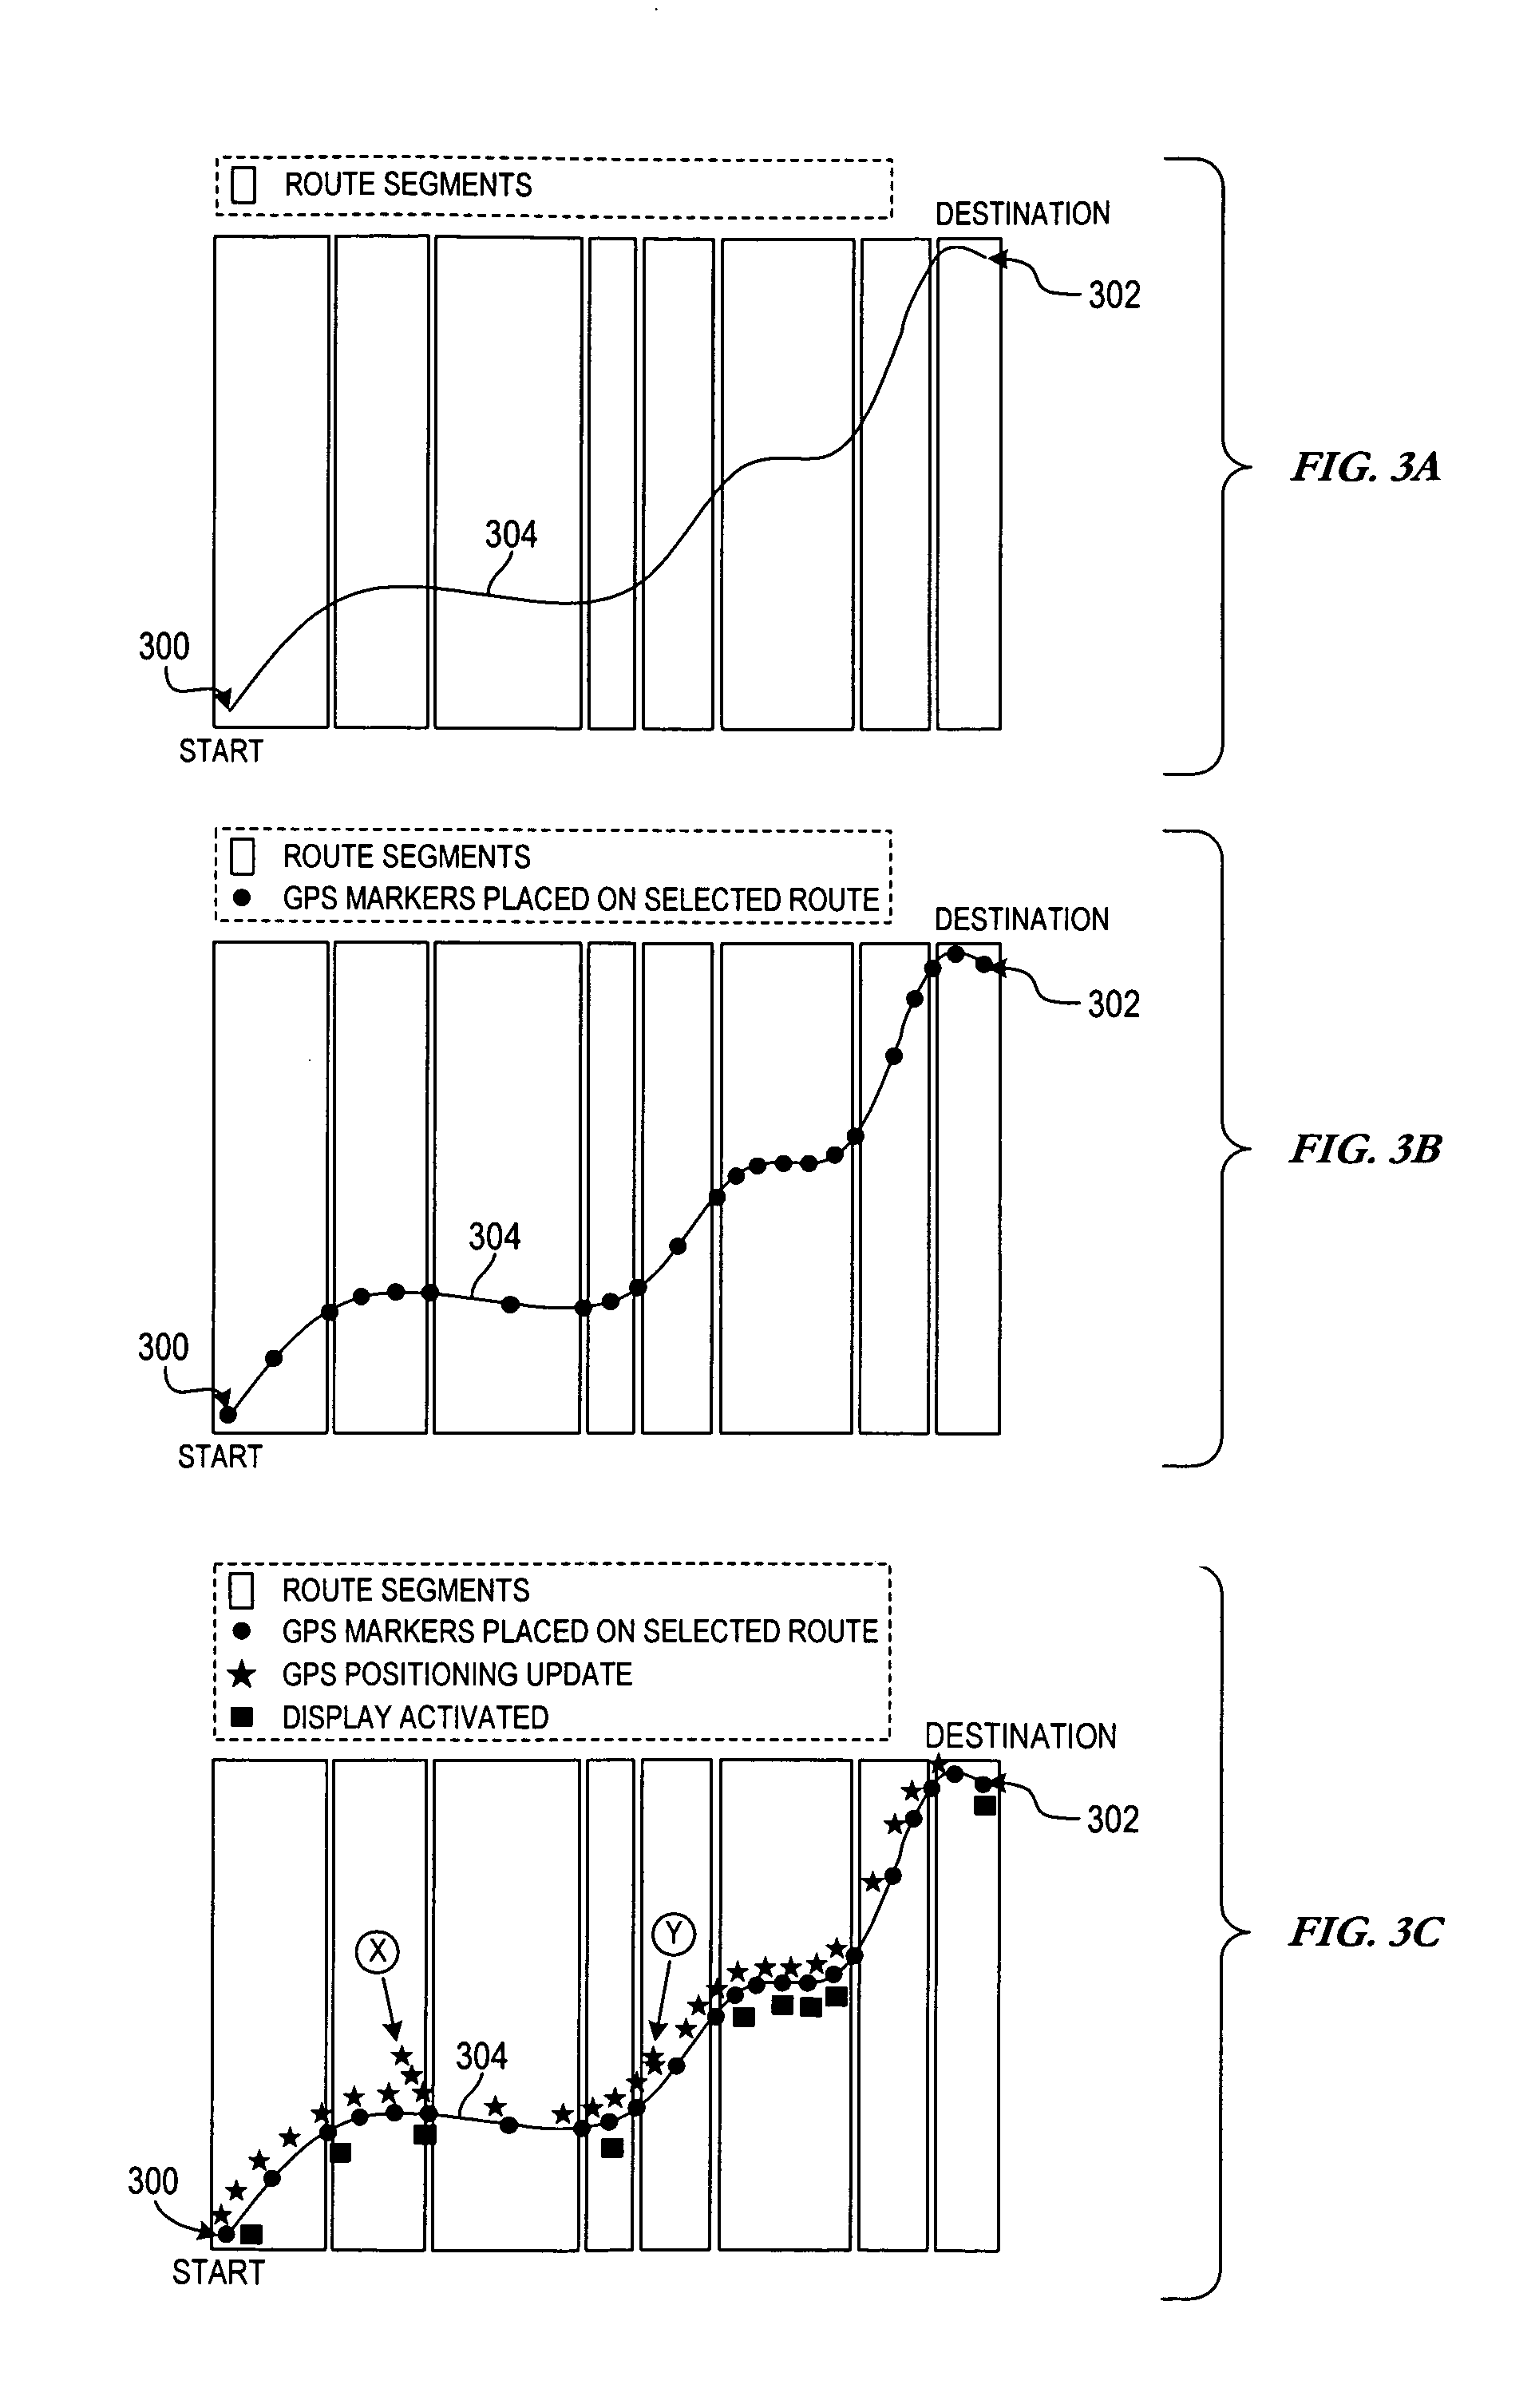 Apparatuses and methods for managing route navigation via mobile devices